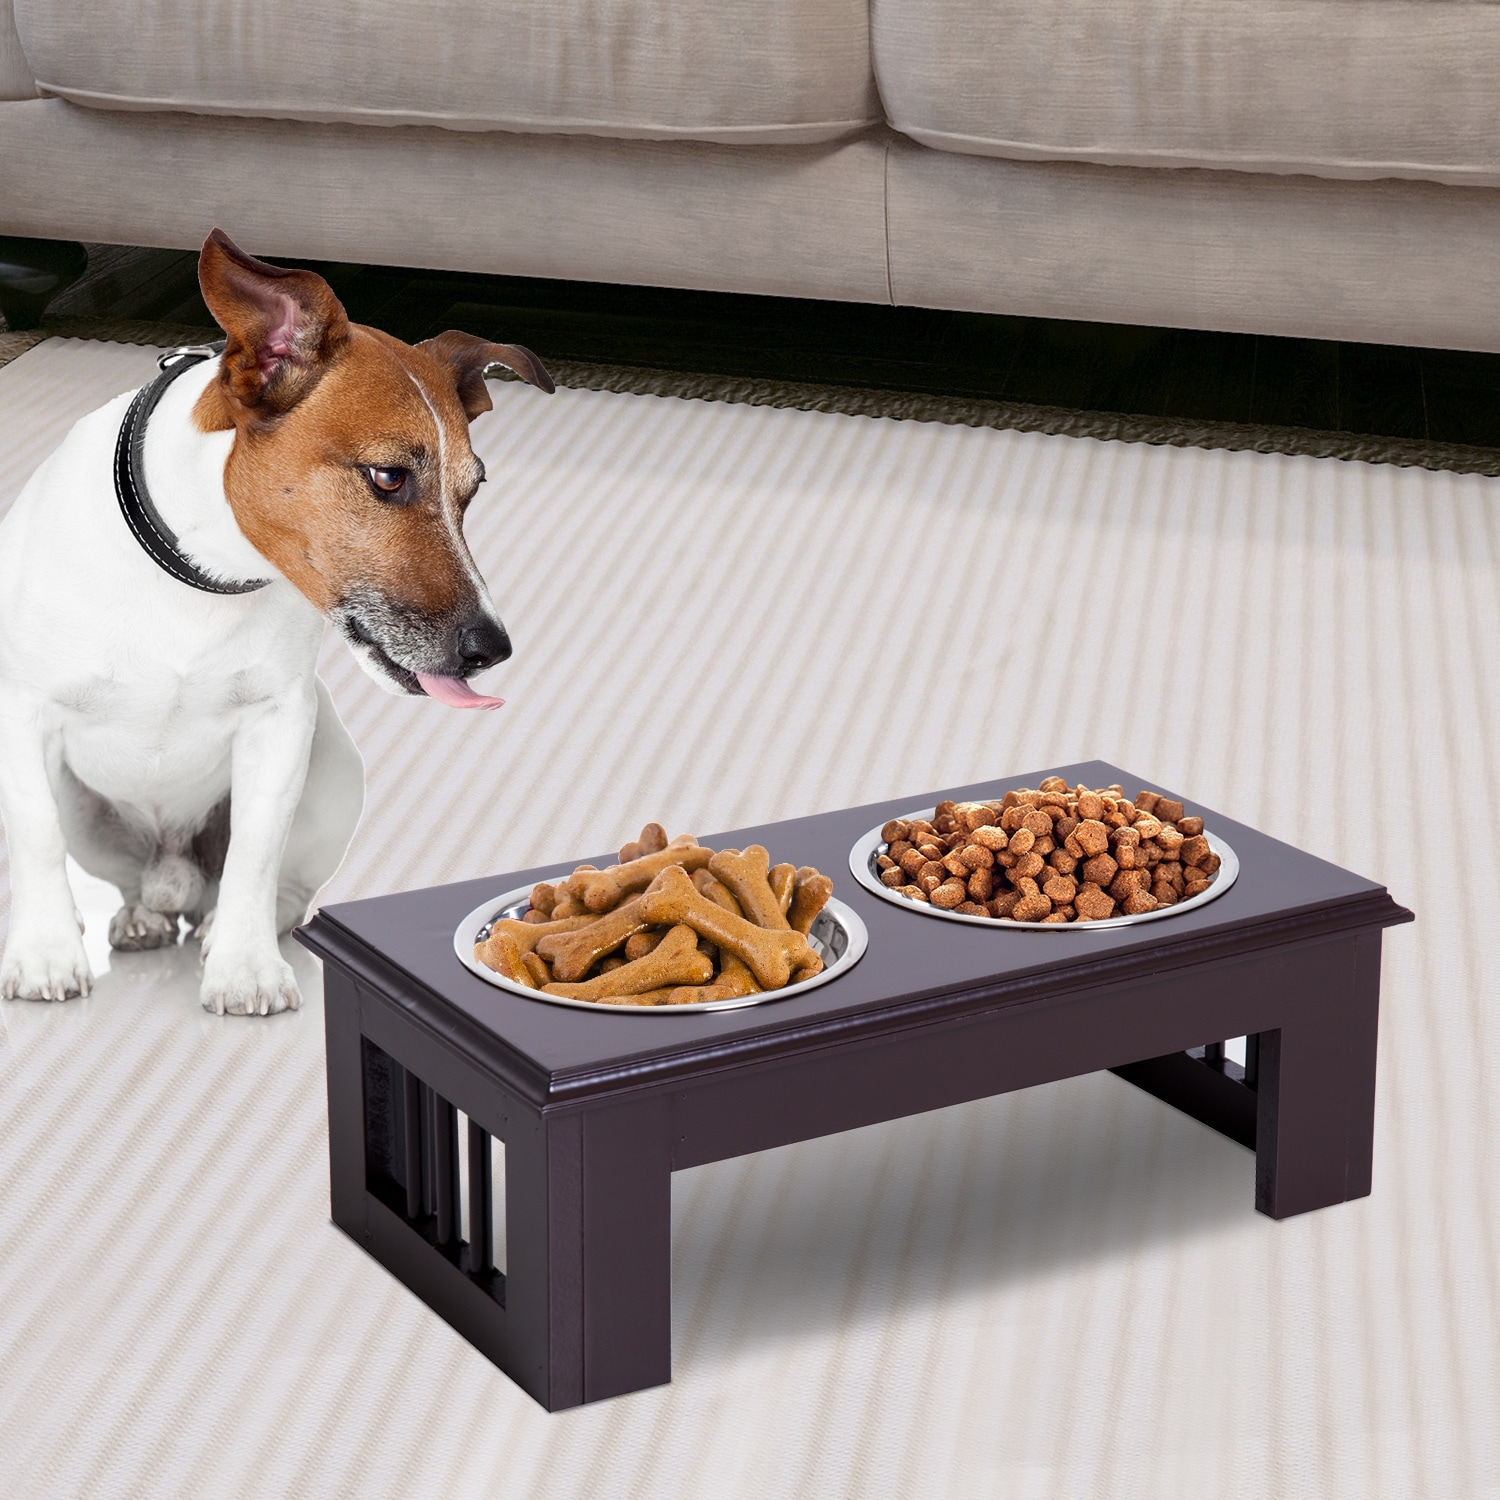 https://ak1.ostkcdn.com/images/products/is/images/direct/397d52f1599c2abaa0fcb3279e60d35221becb75/PawHut-17%22-Dog-Feeding-Station-with-2-Food-Bowls%2C-White.jpg